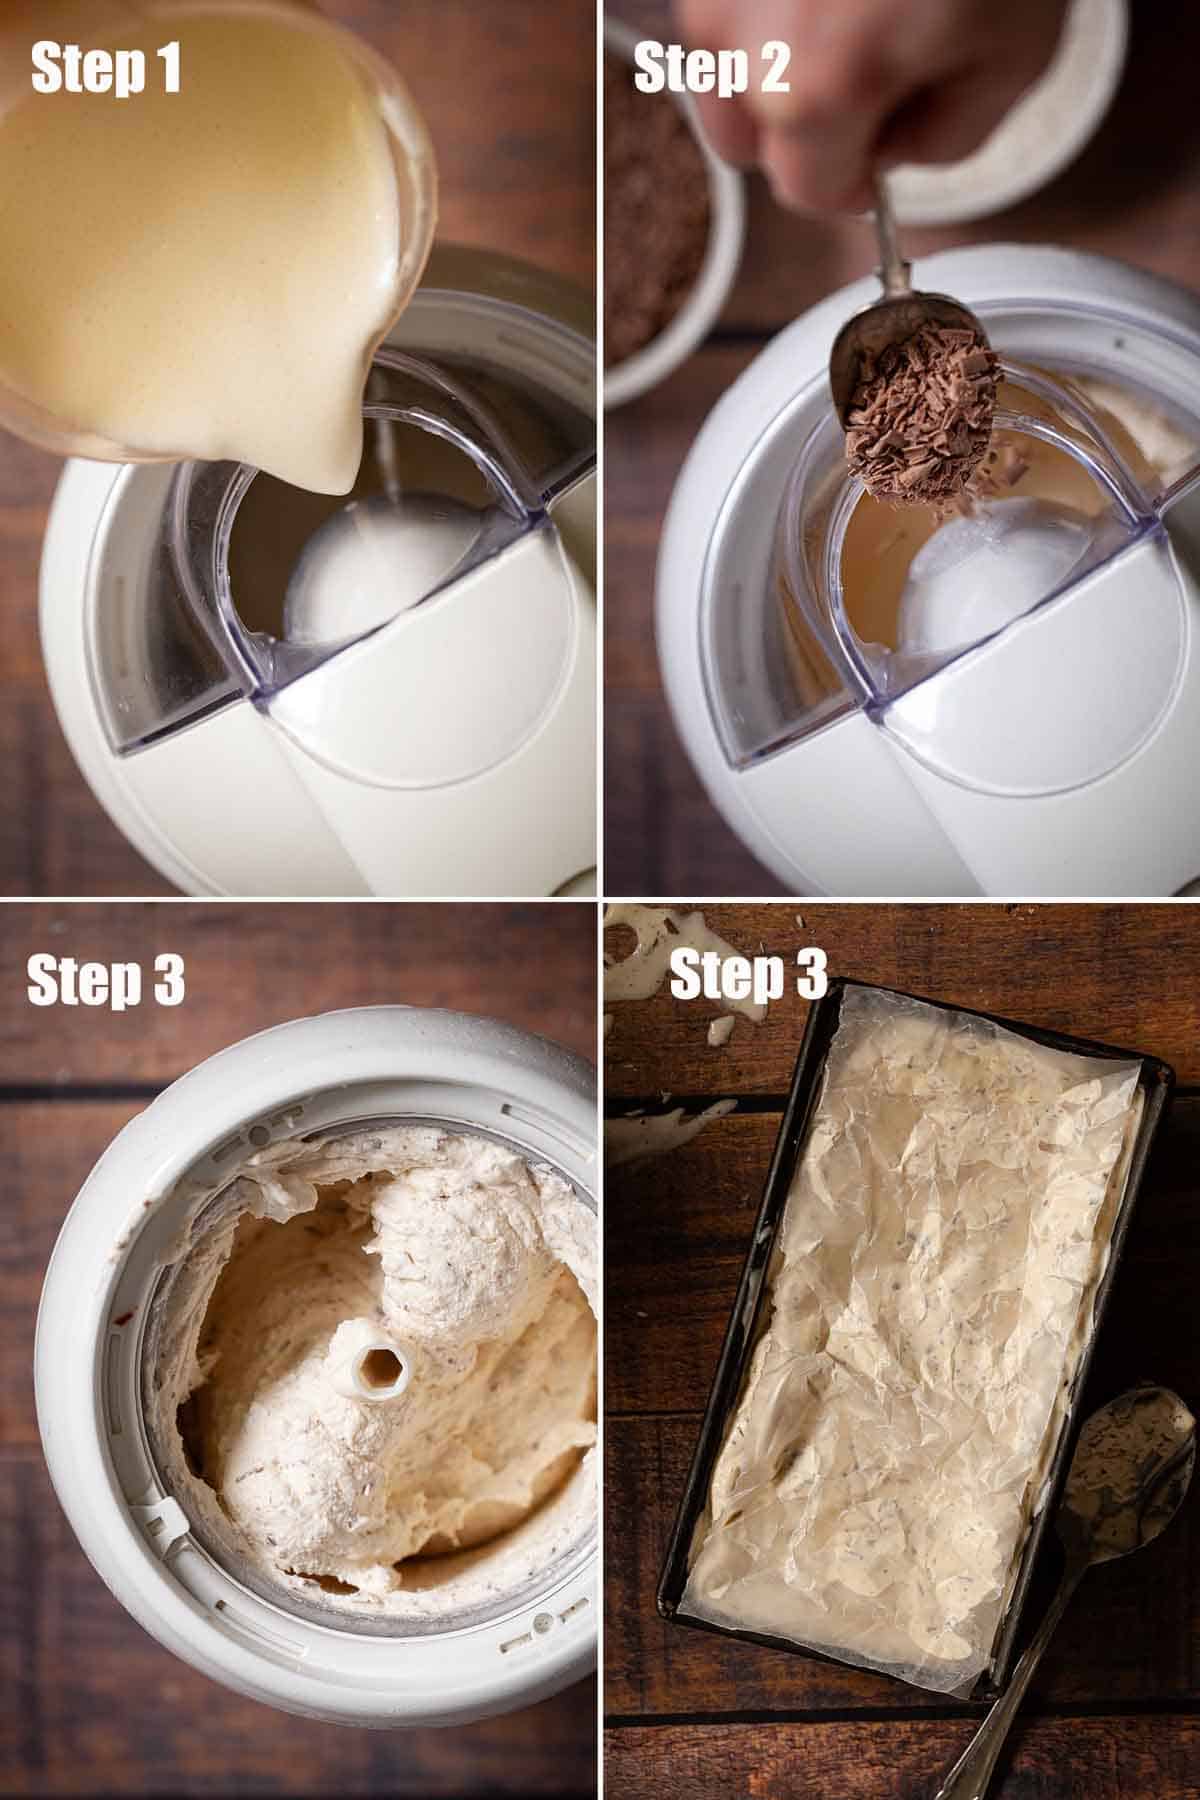 Collage of images showing ice cream being churned